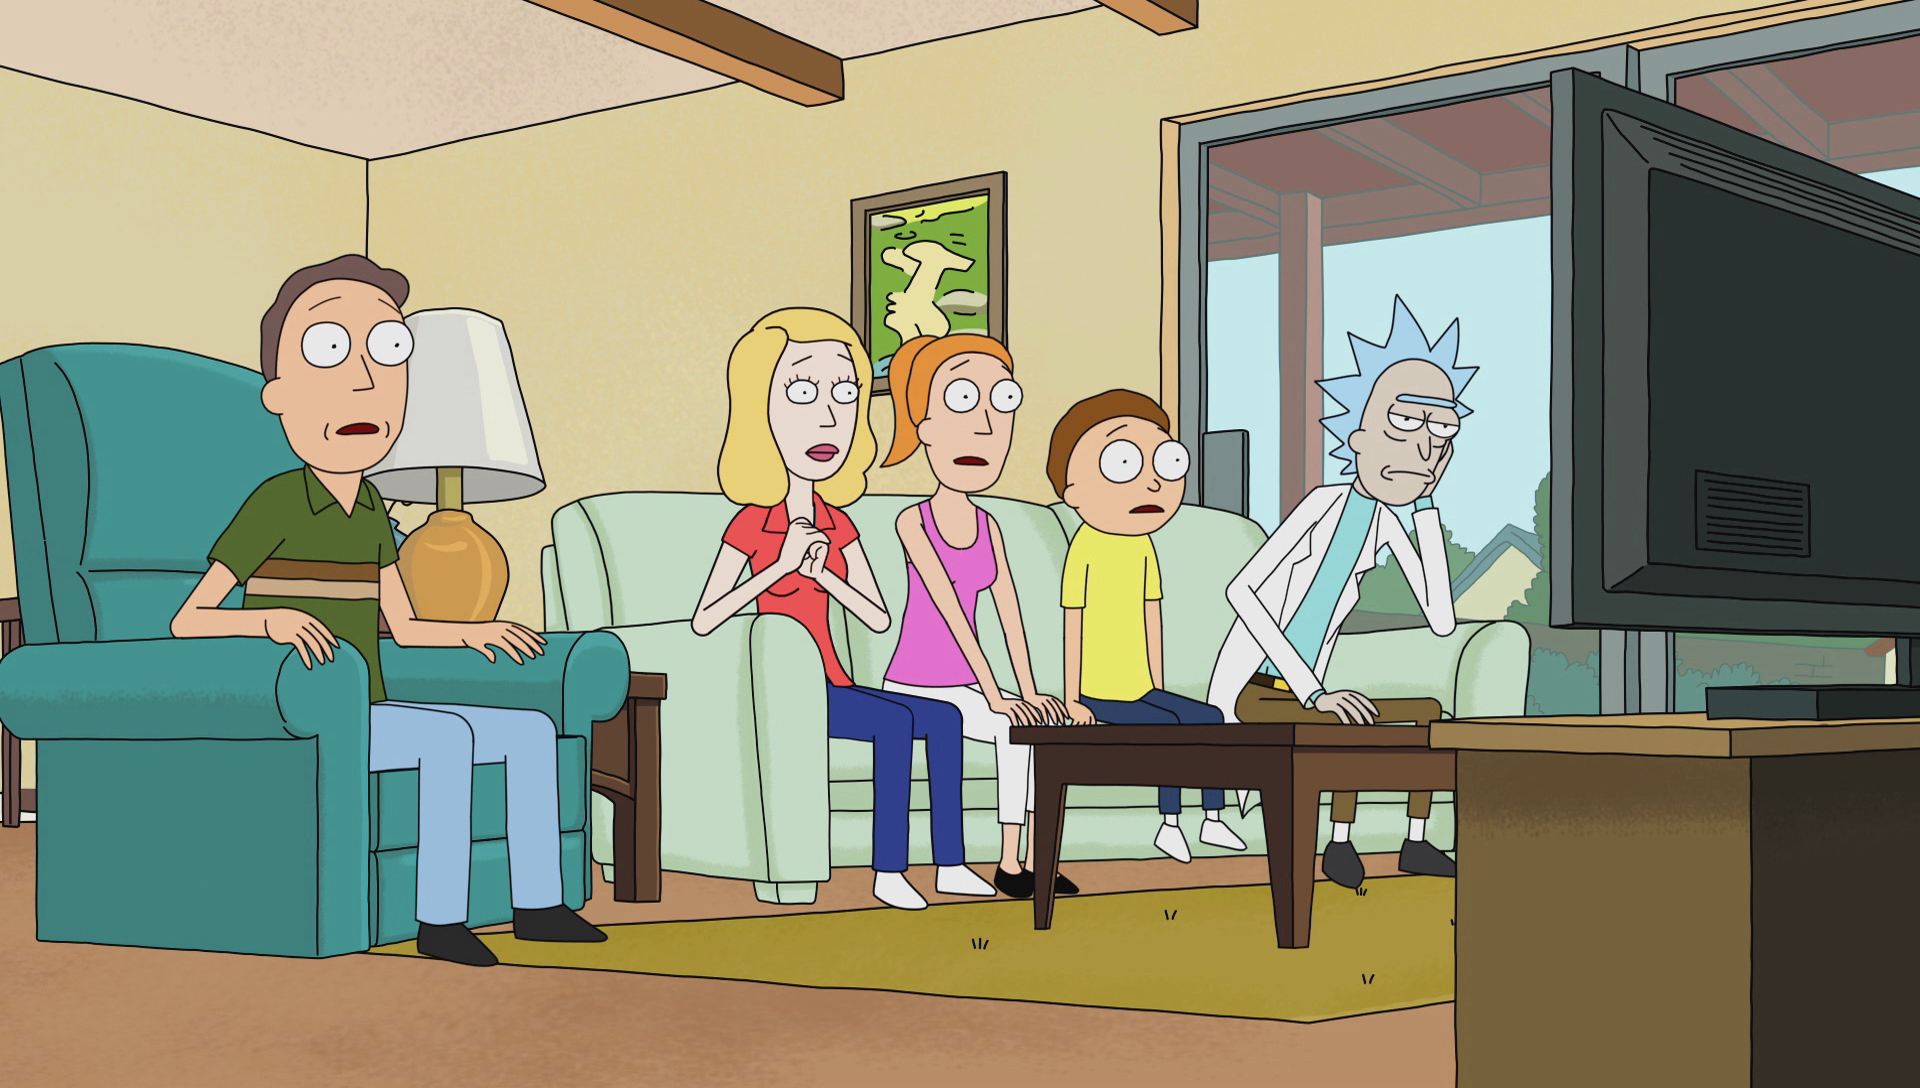 How to watch Rick and Morty season 5 episode 8 online, start time, channel  and more